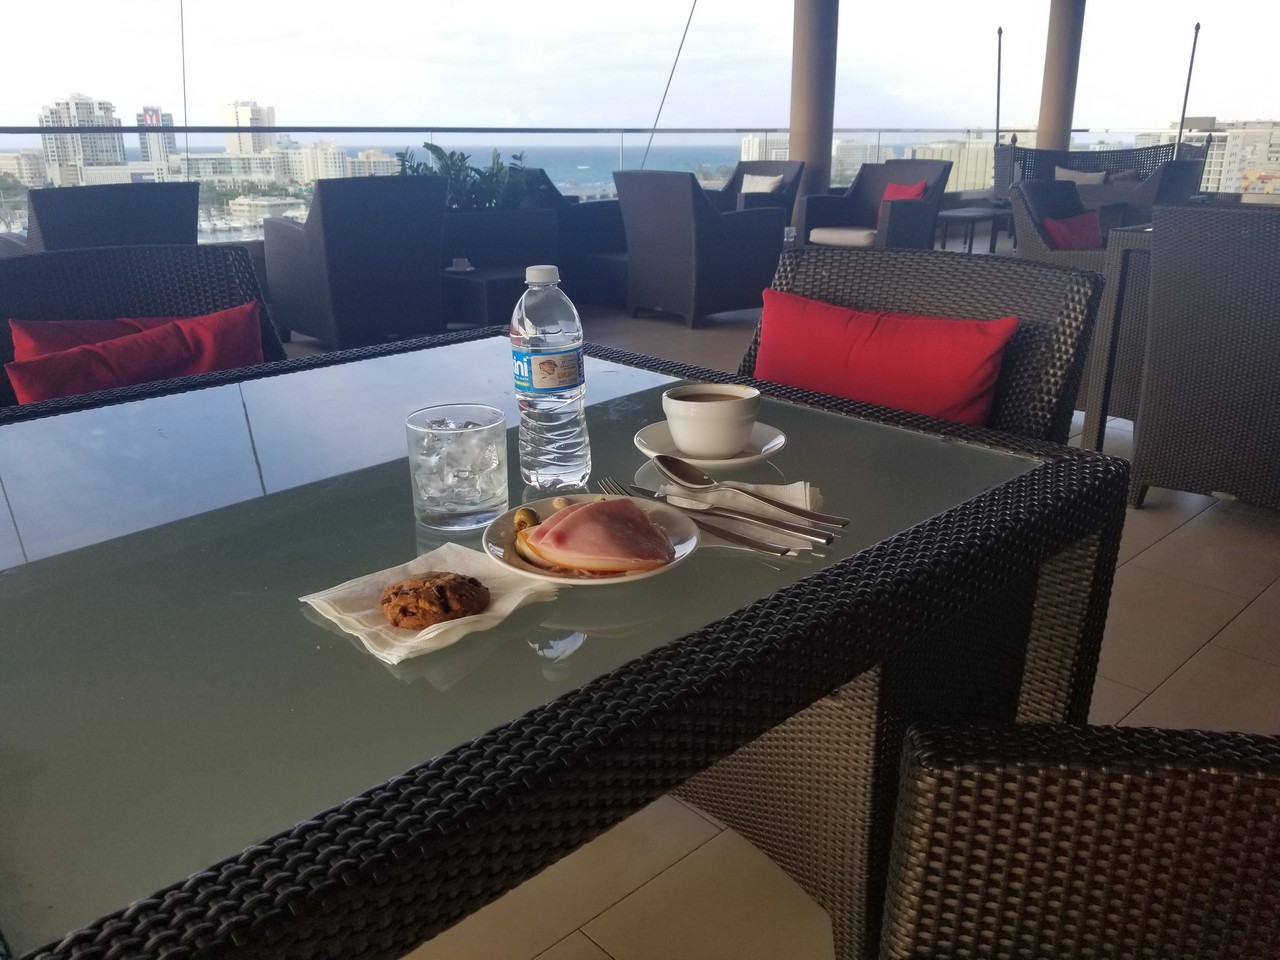 a table with food and water on it